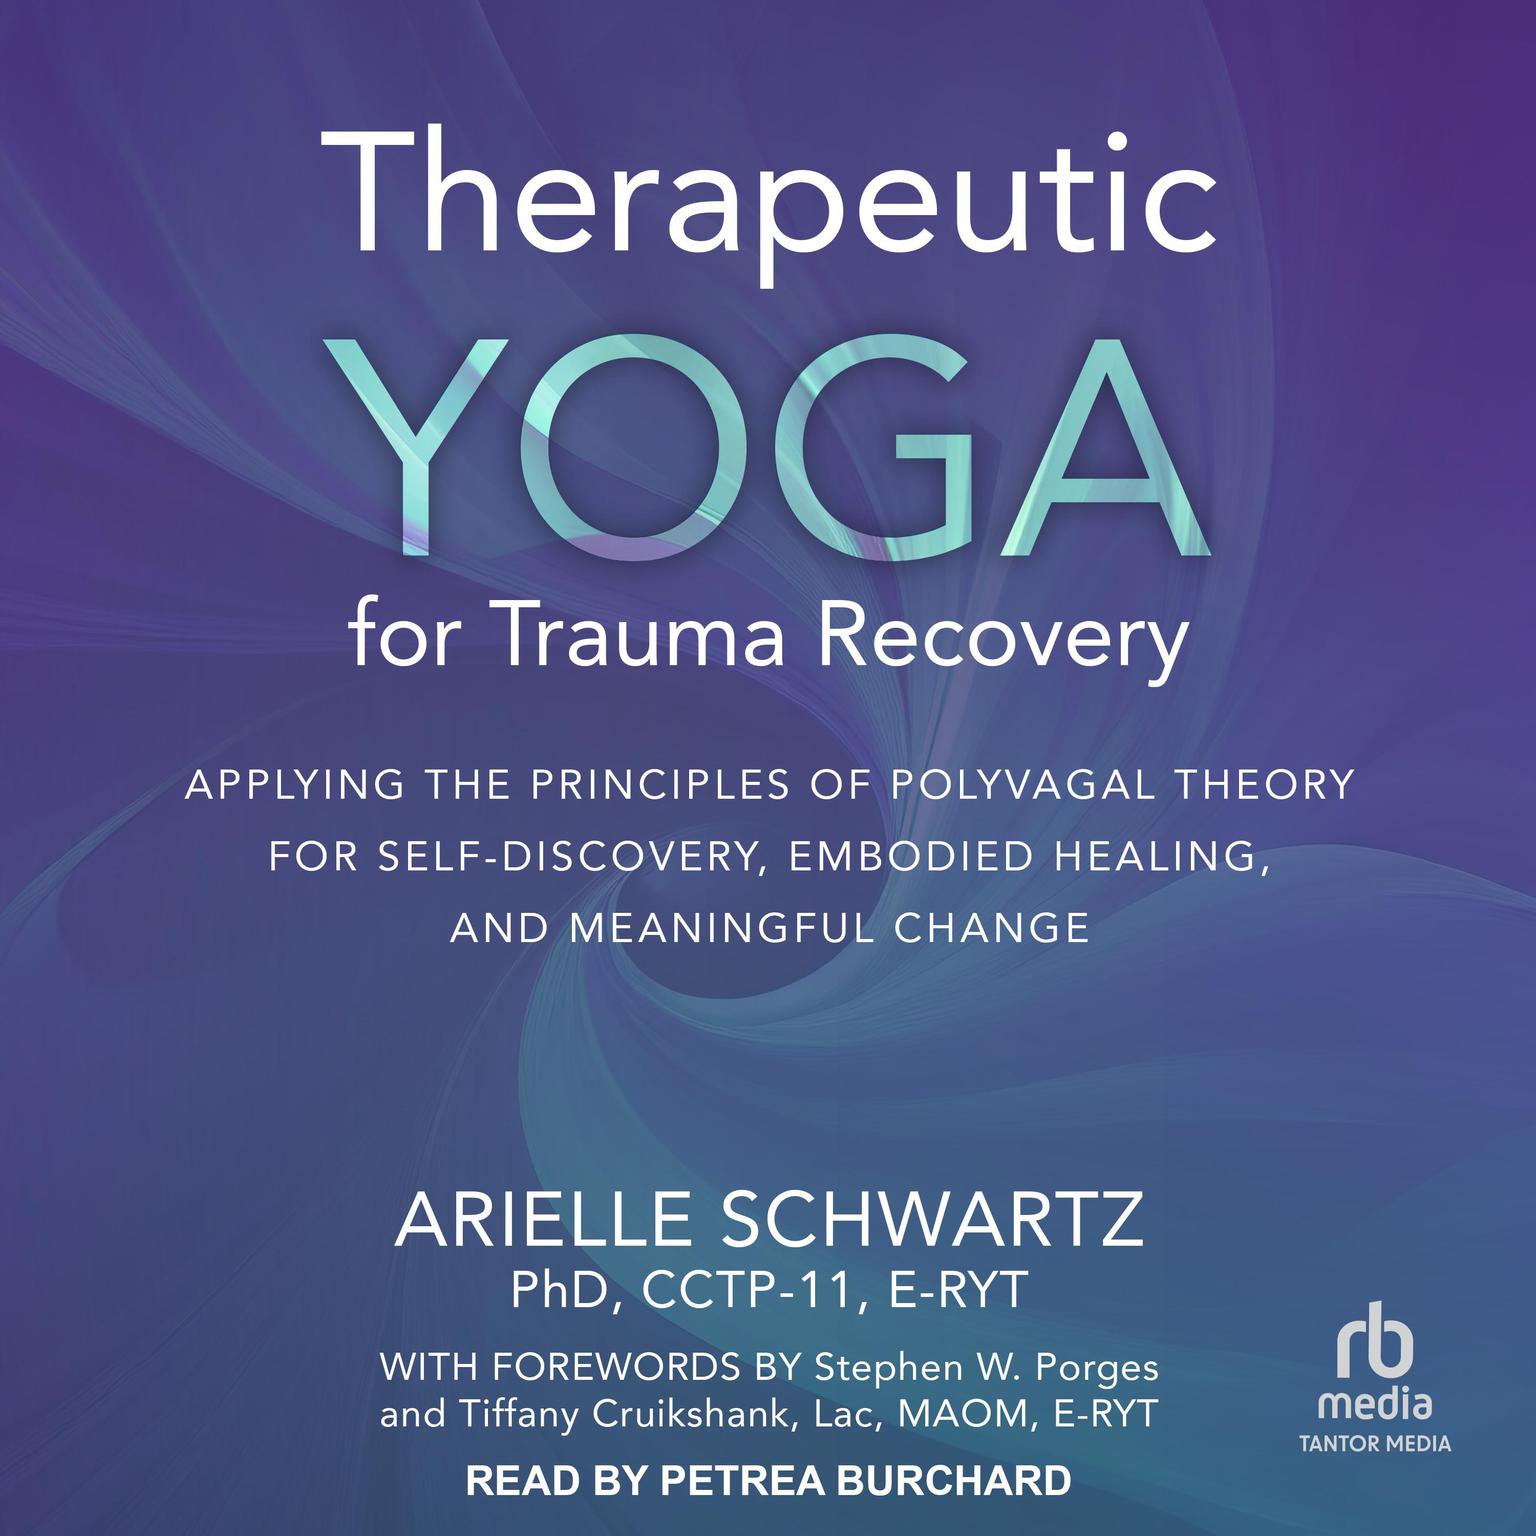 Therapeutic Yoga for Trauma Recovery: Applying the Principles of Polyvagal Theory for Self-Discovery, Embodied Healing, and Meaningful Change Audiobook, by Arielle Schwartz